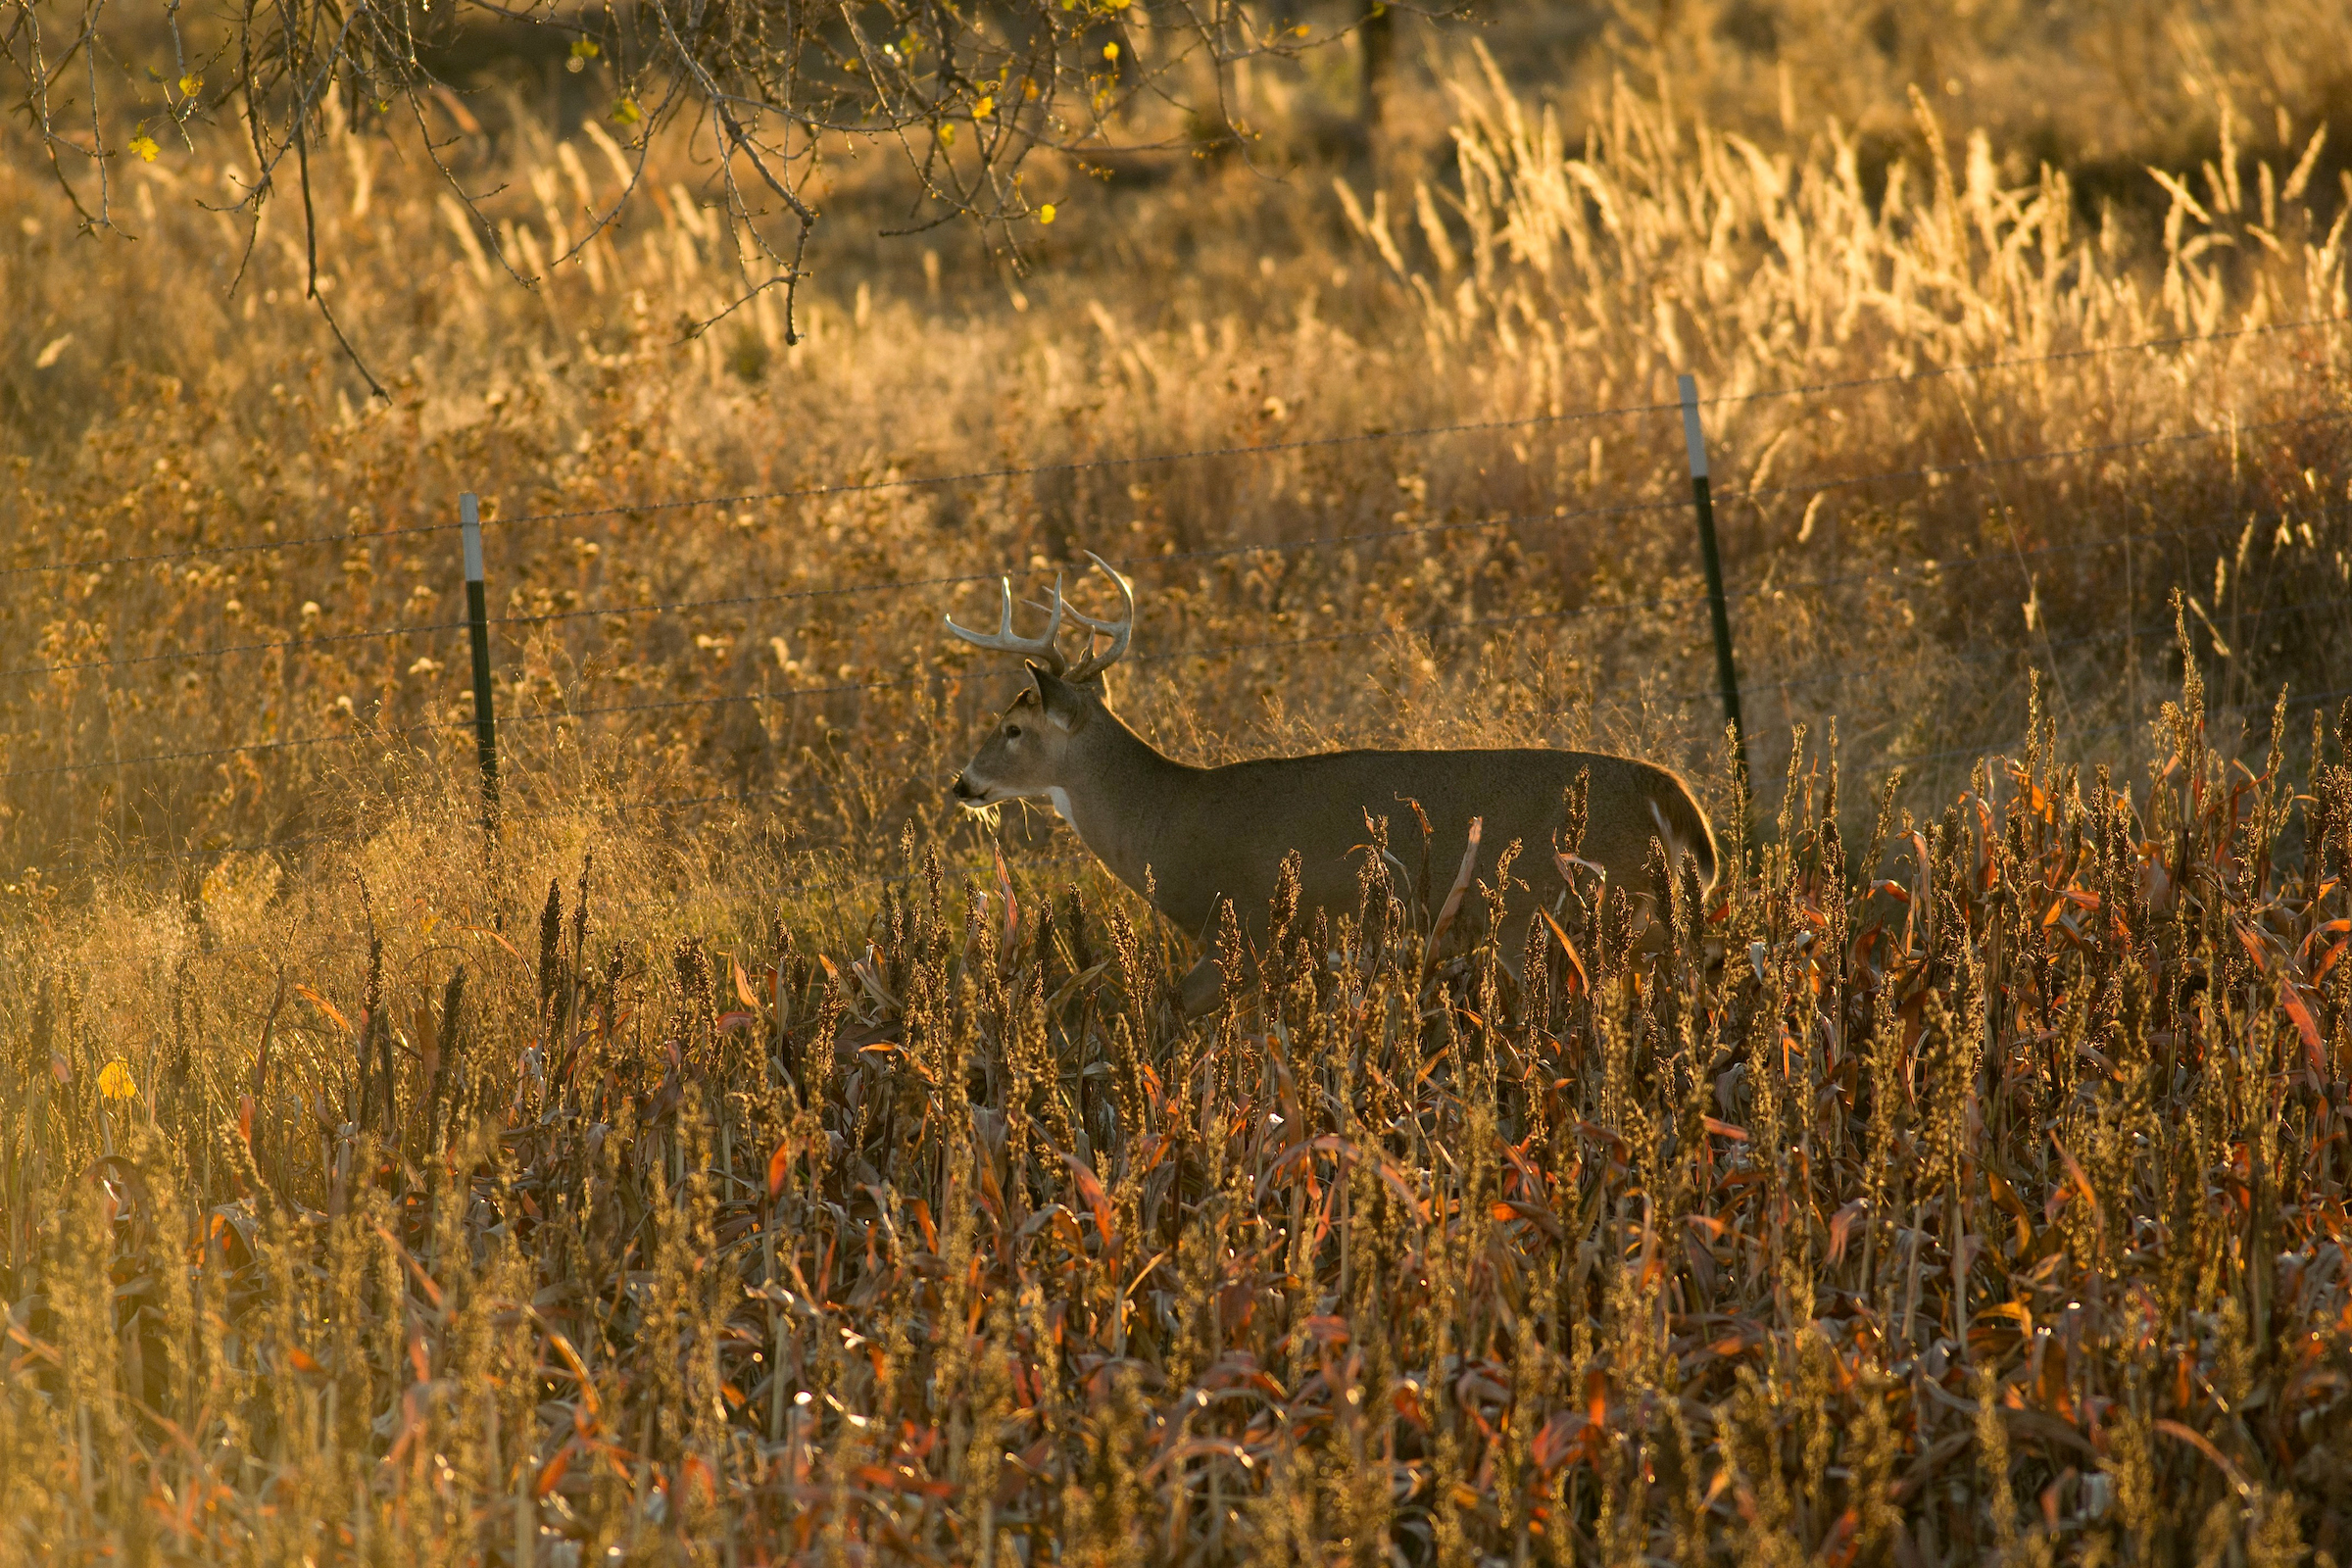 whitetail buck walking alongside a barbed wire fence during golden hour